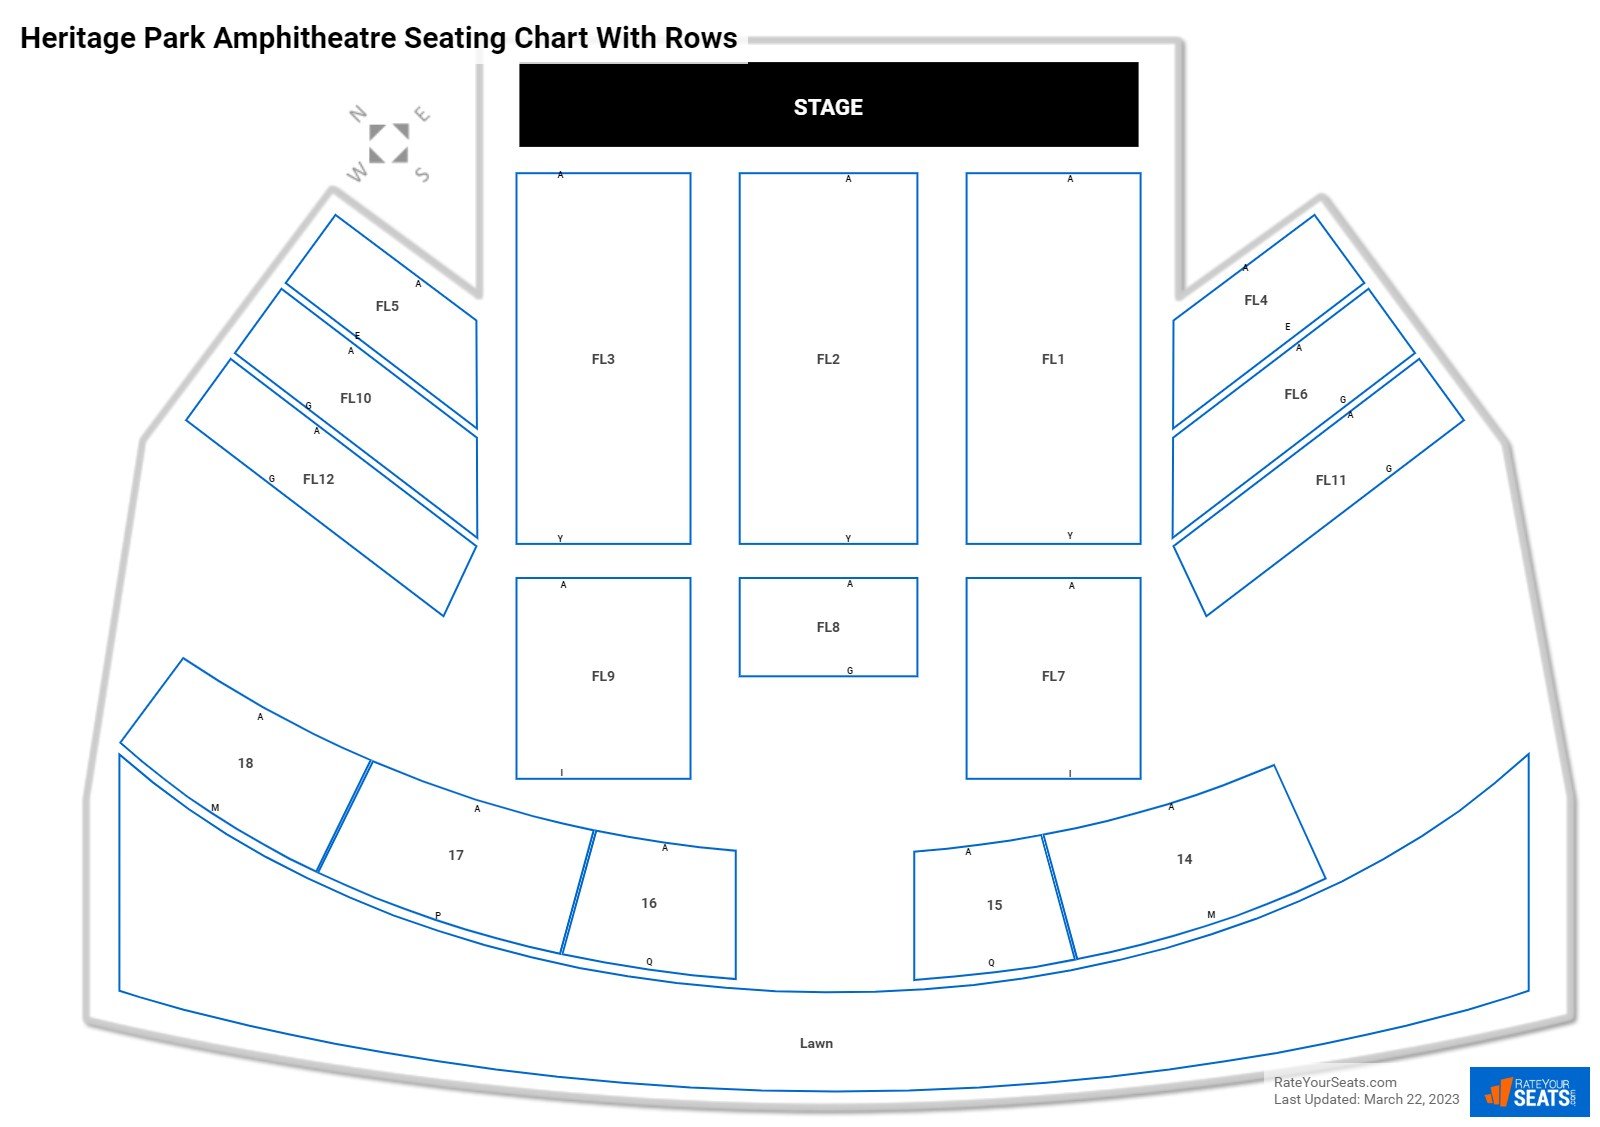 Heritage Park Amphitheatre seating chart with row numbers